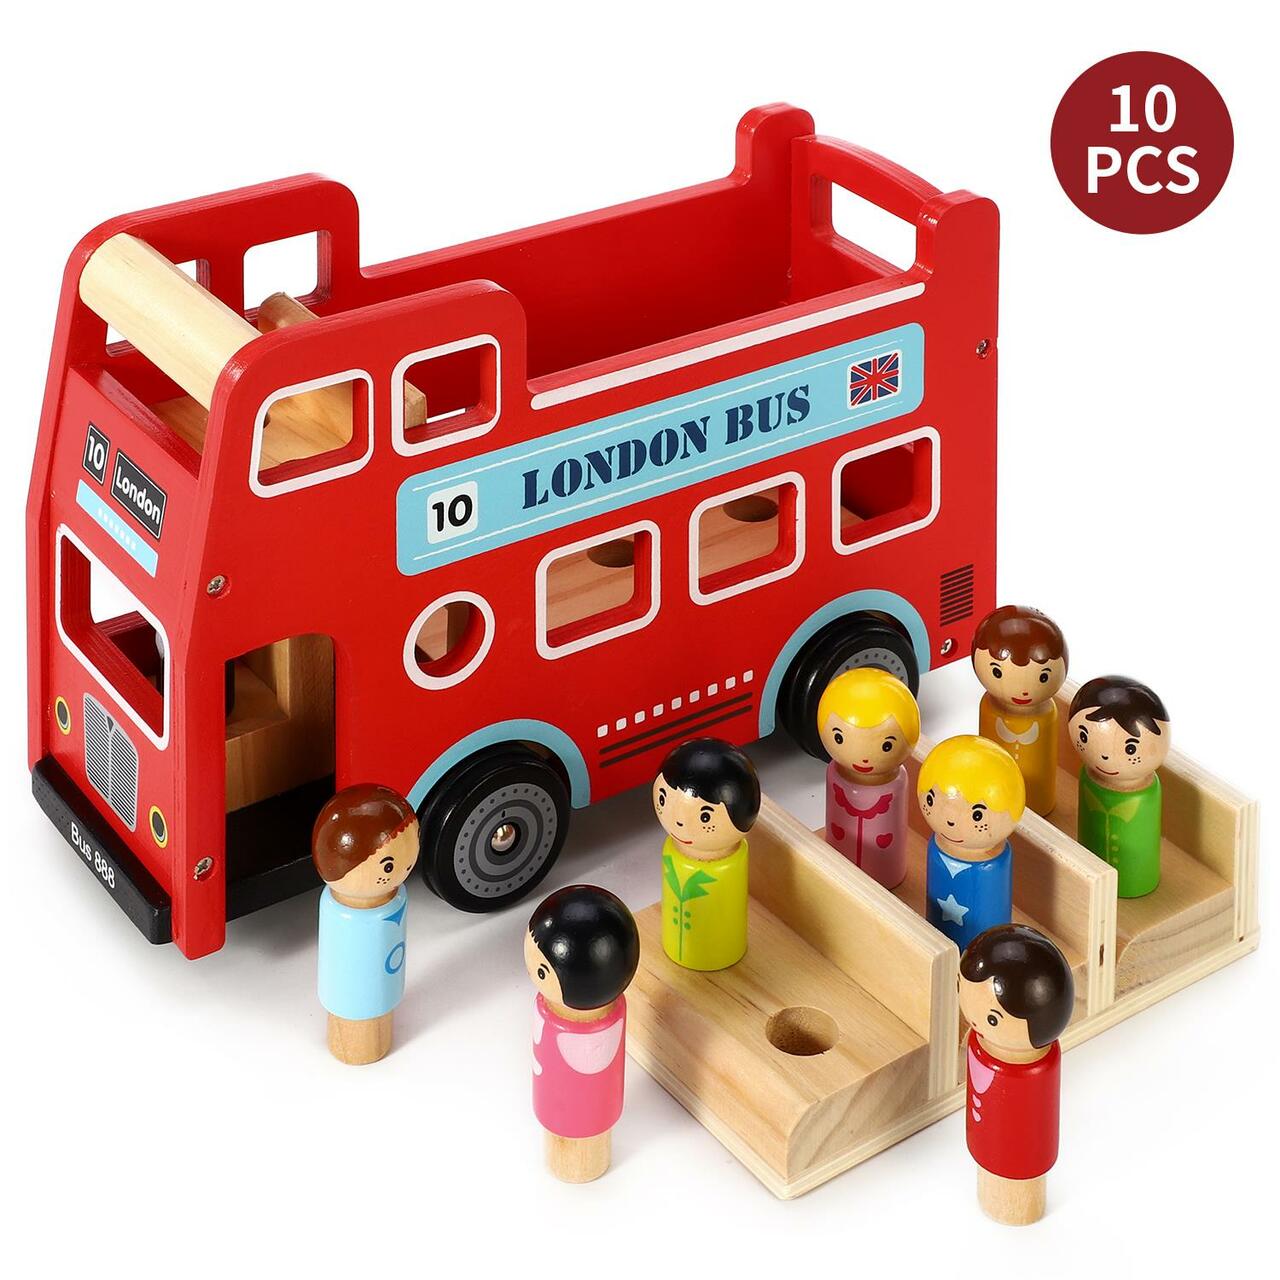 Personalised Wooden Original Double Decker Red Classic London Sightseeing Bus with Driver & Passenger Figurines | Babba box.